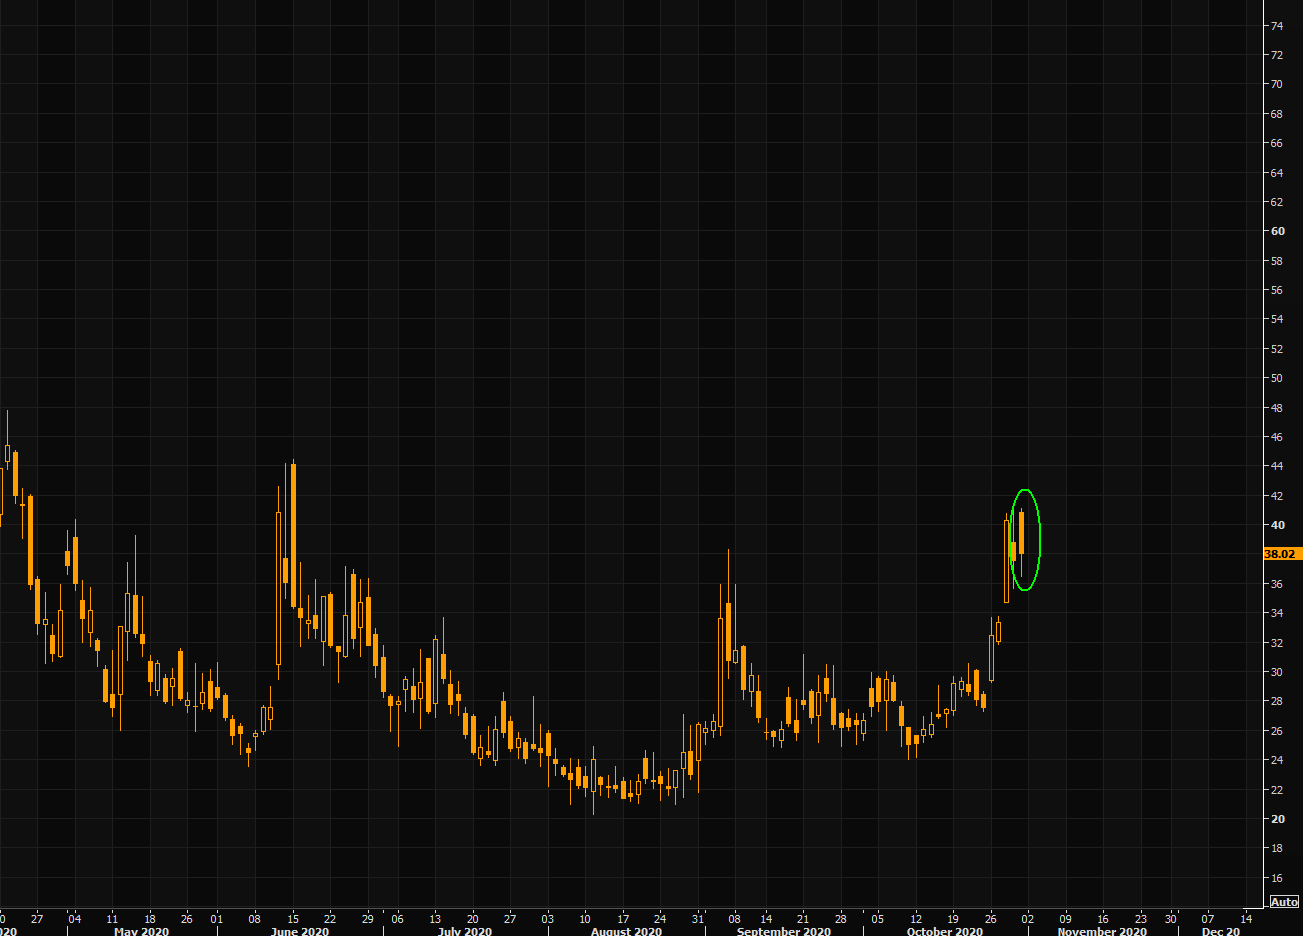 VIX - today was the biggest negative candle in a long time 